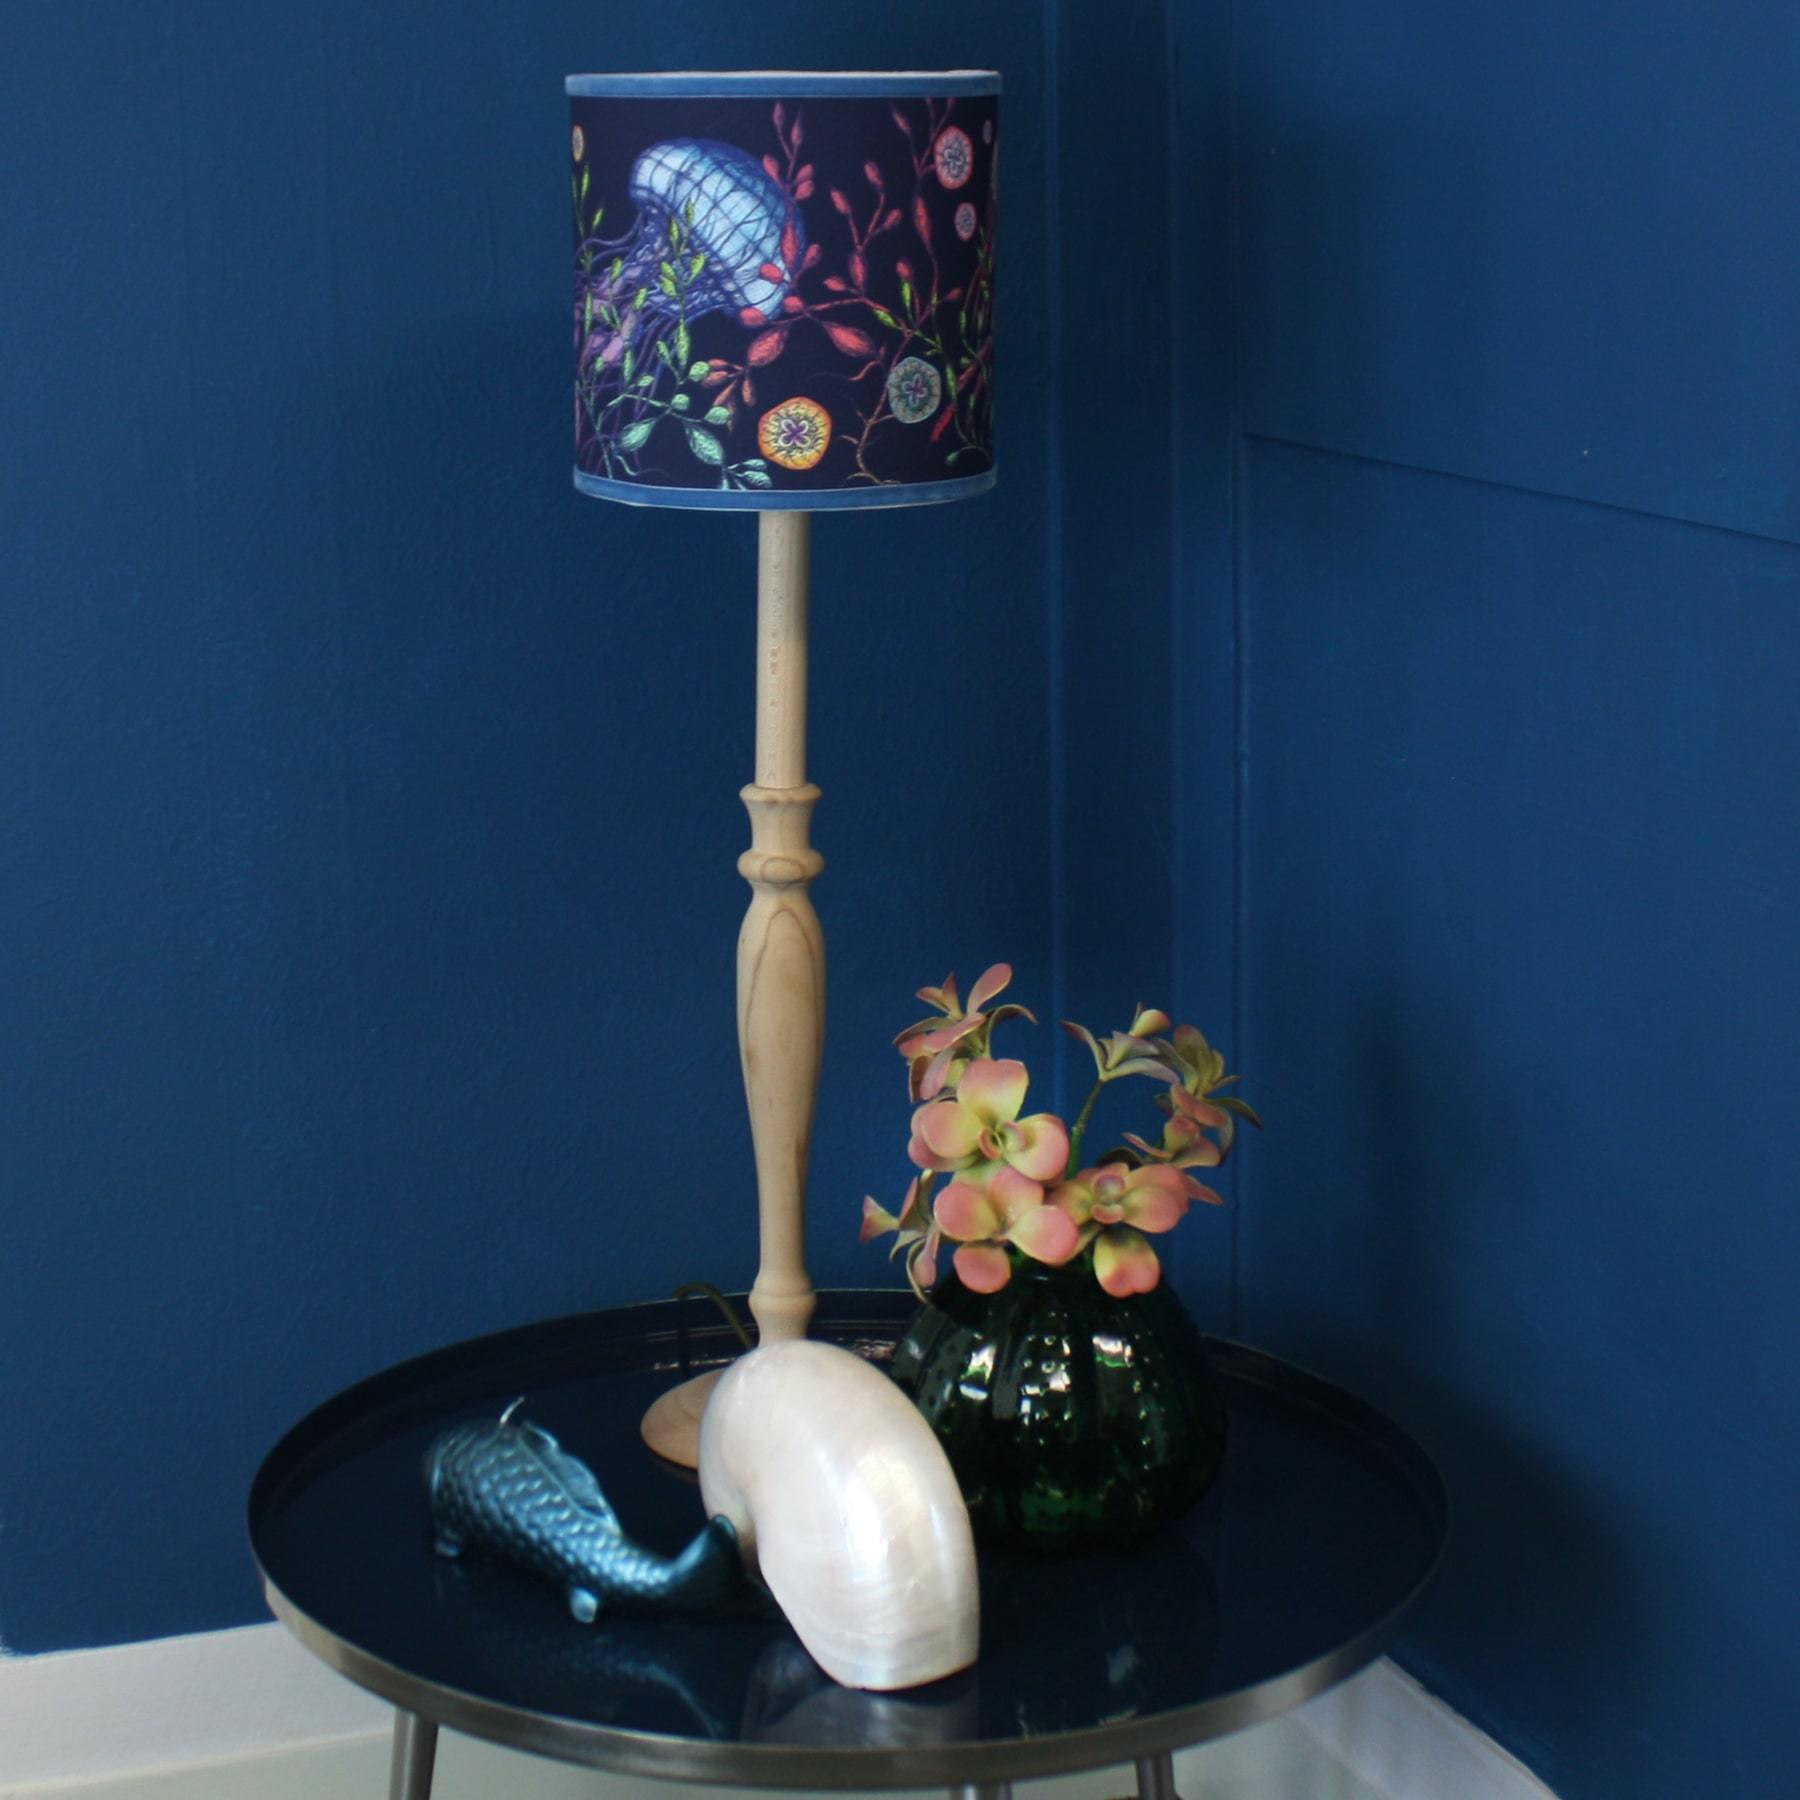 Canyons Reef Navy Shade With Jellyfish Design And Velvet Trim on a wooden lampbase placed on a blue table with a blue fish candle,large shell and a small vase with flowers